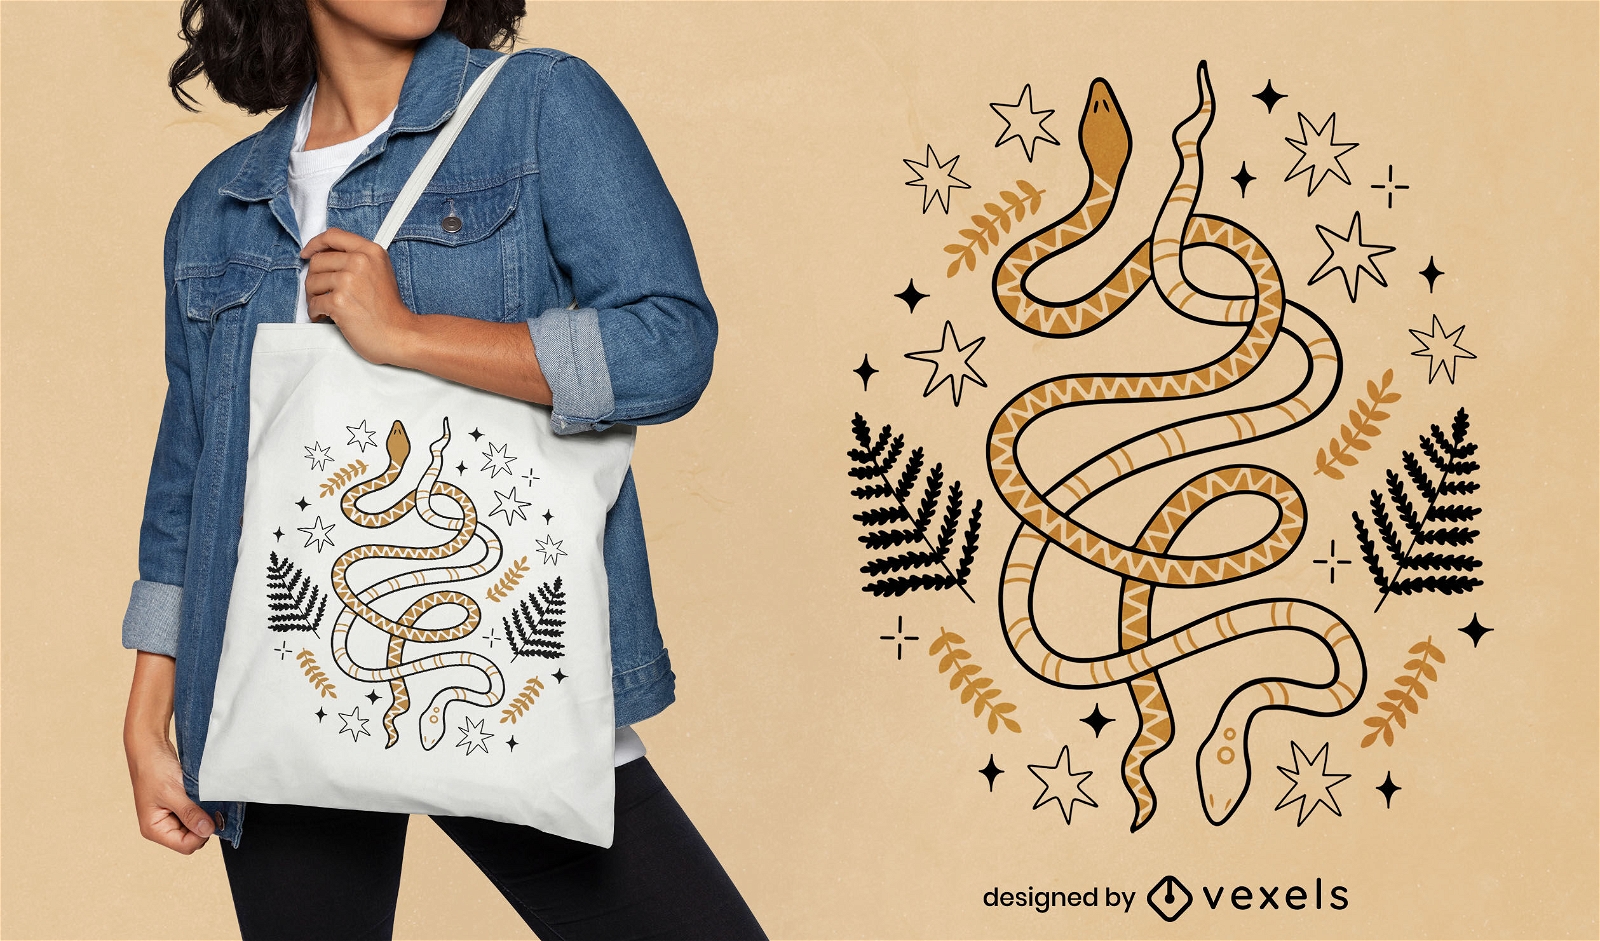 Snakes with stars tote bag design